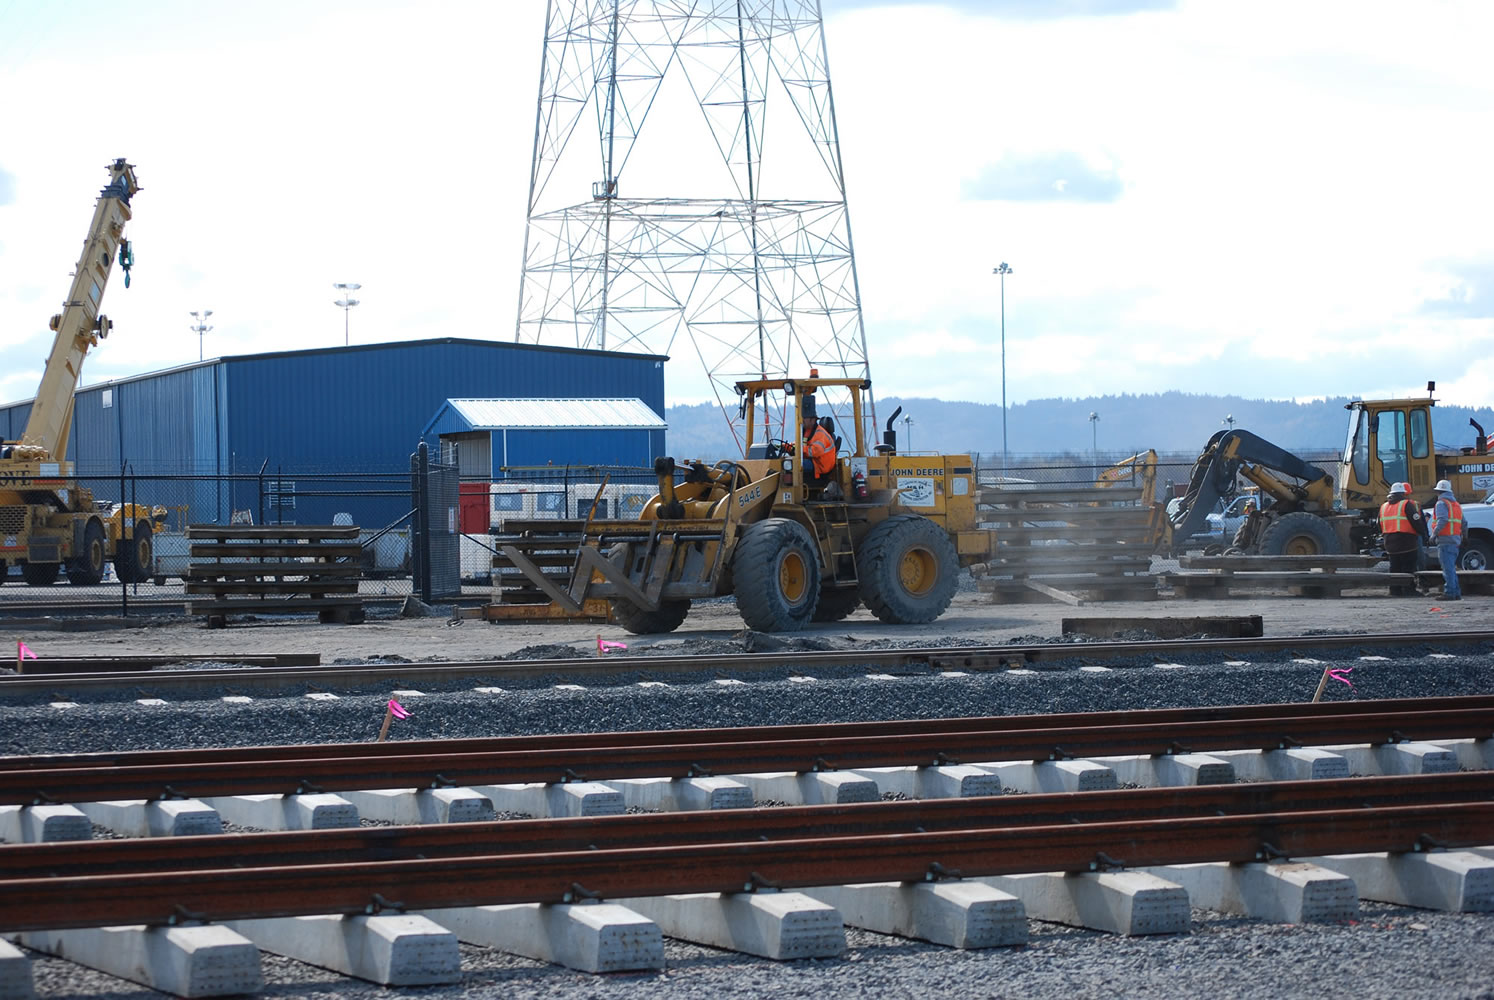 The Port of Vancouver is expanding its rail system from 16 miles to 44 miles of tracks.